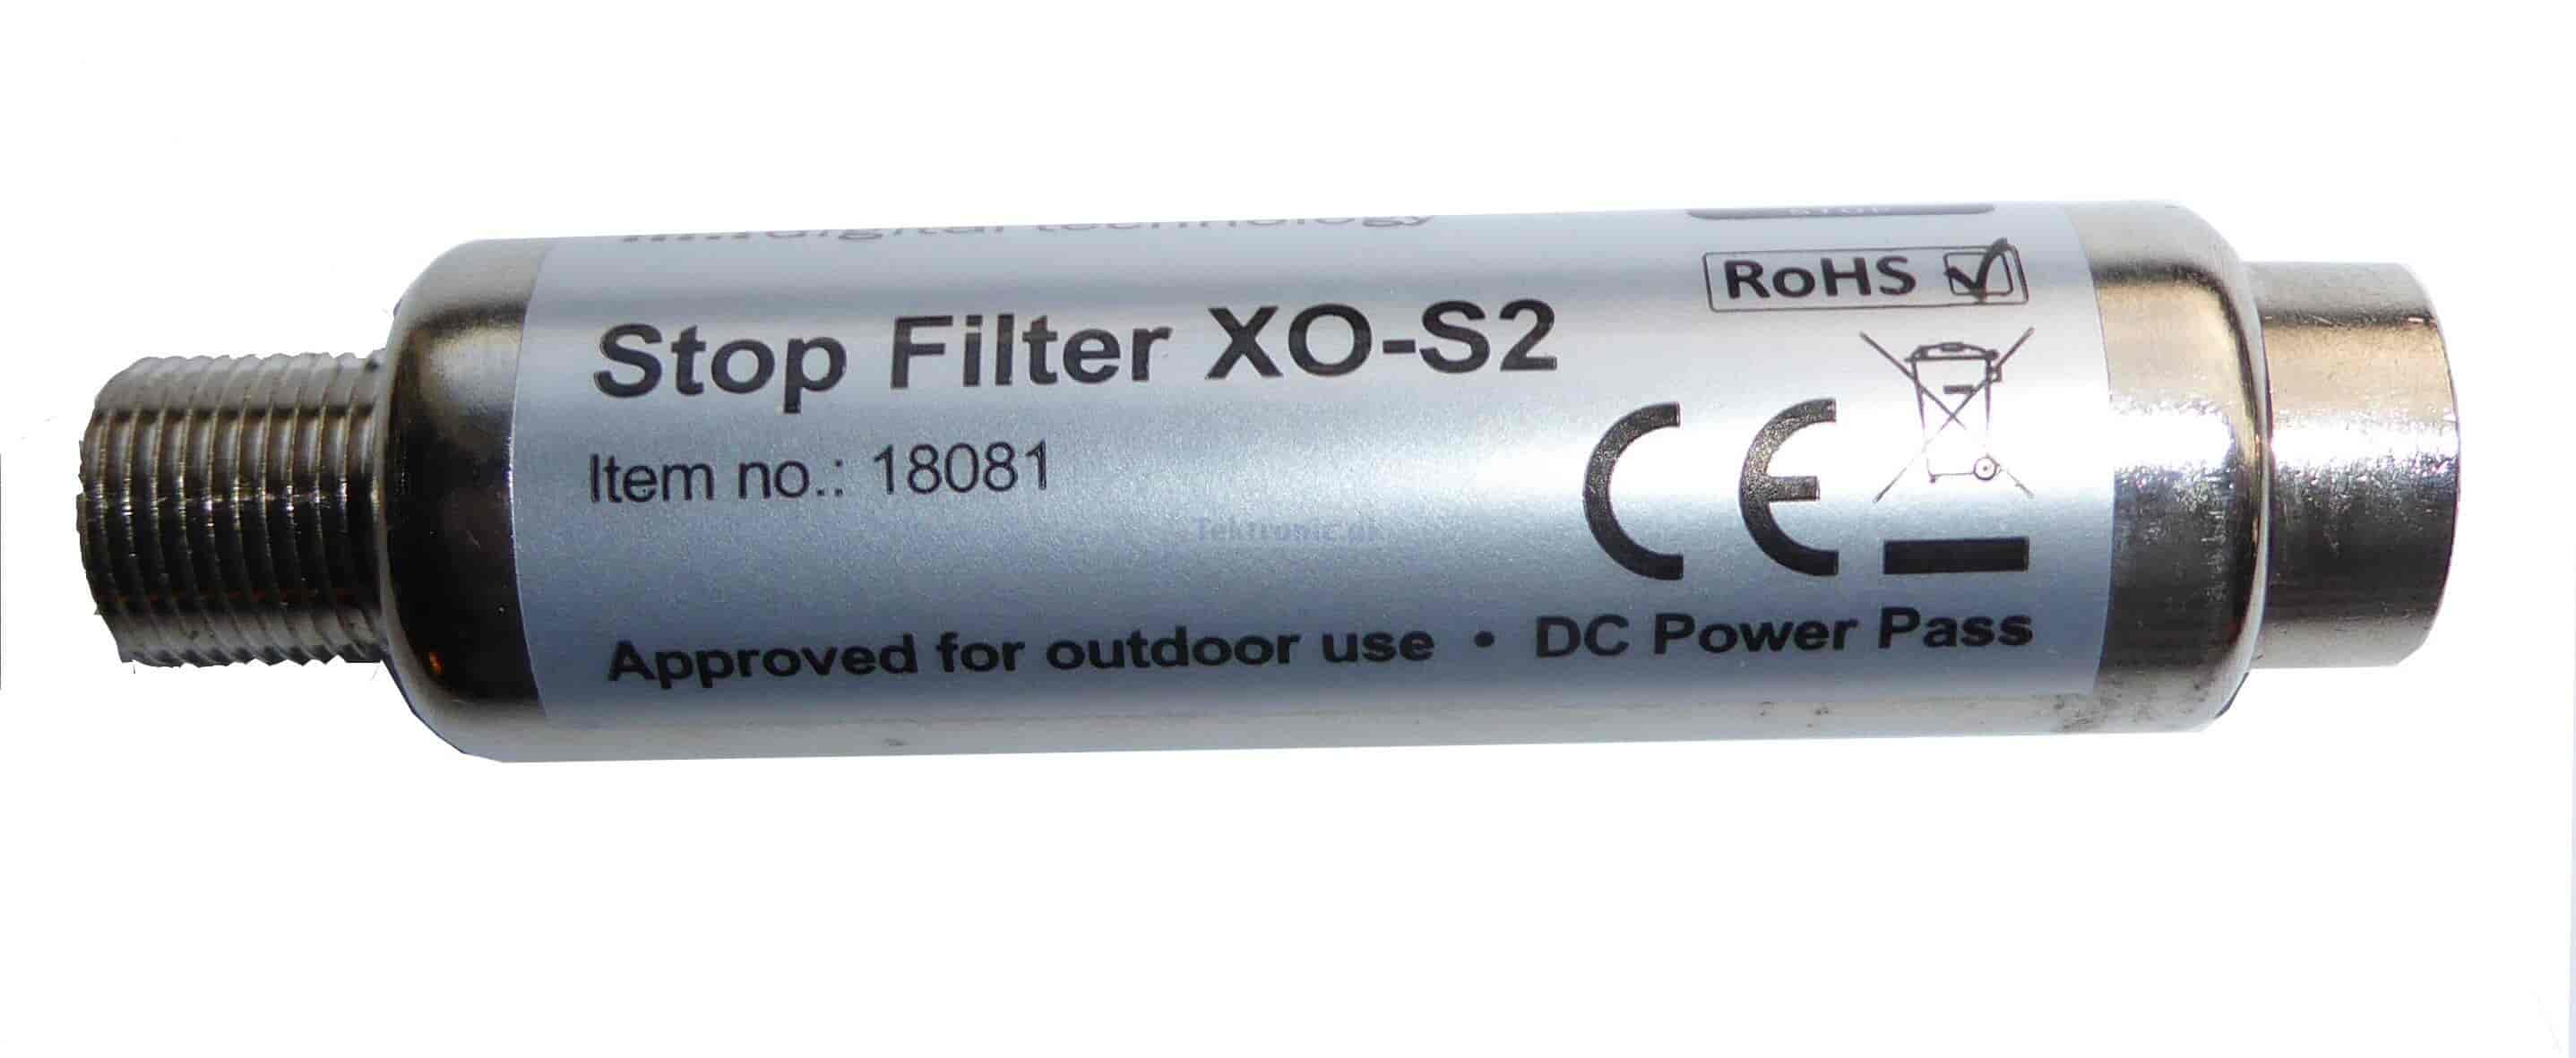 Stop filter 4G LTE for antenna